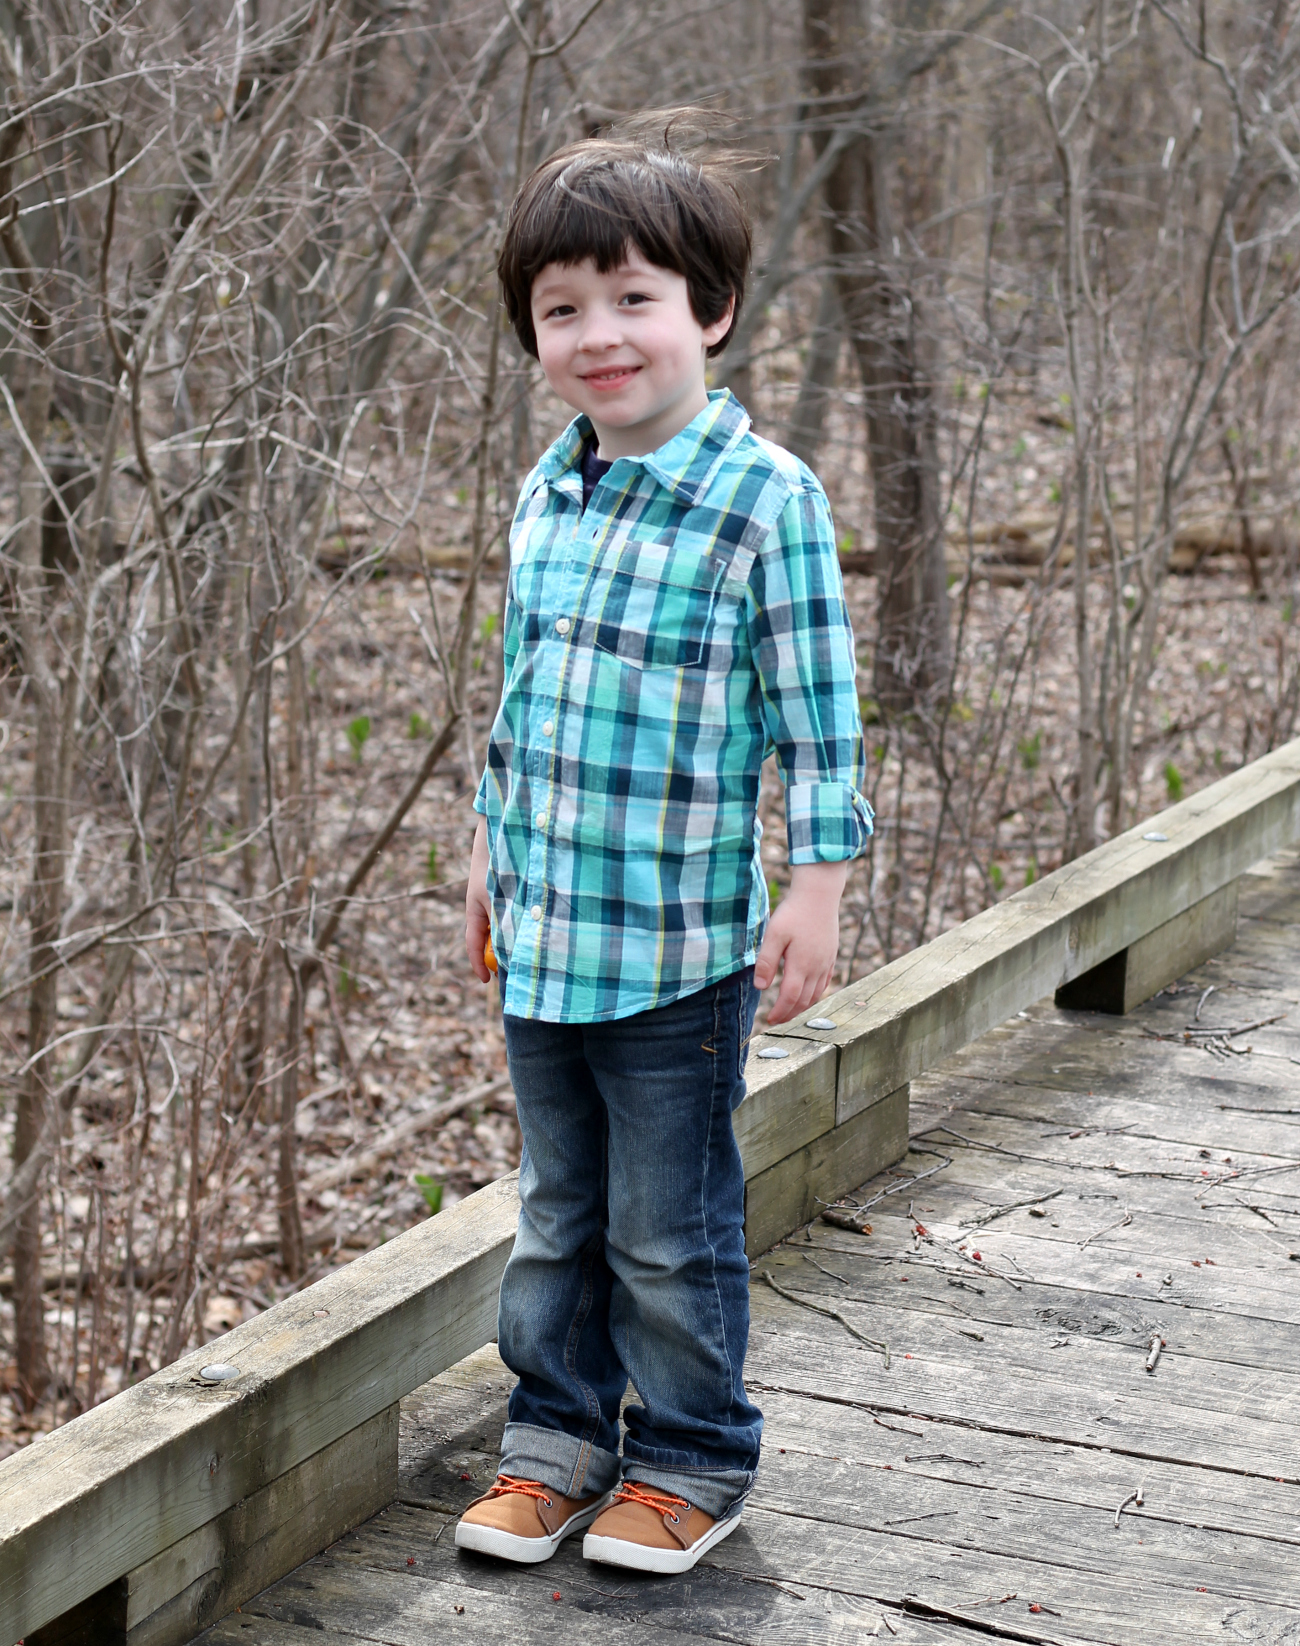 Must-Have Spring Clothing for Boys